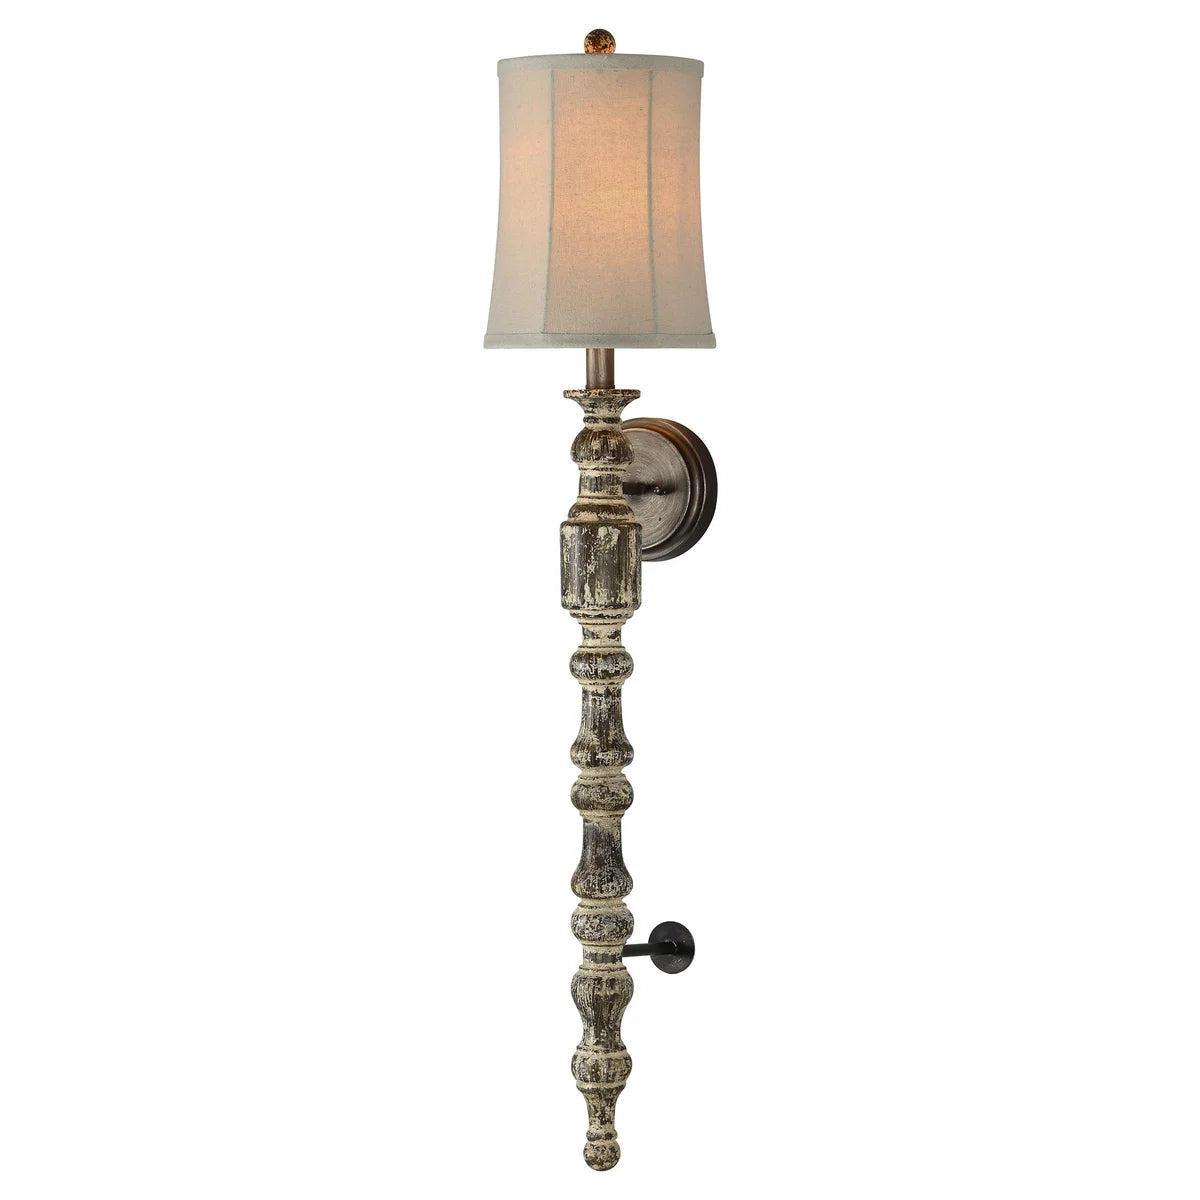 Forty West Designs 70905 Harlan Wall Sconce with Shade